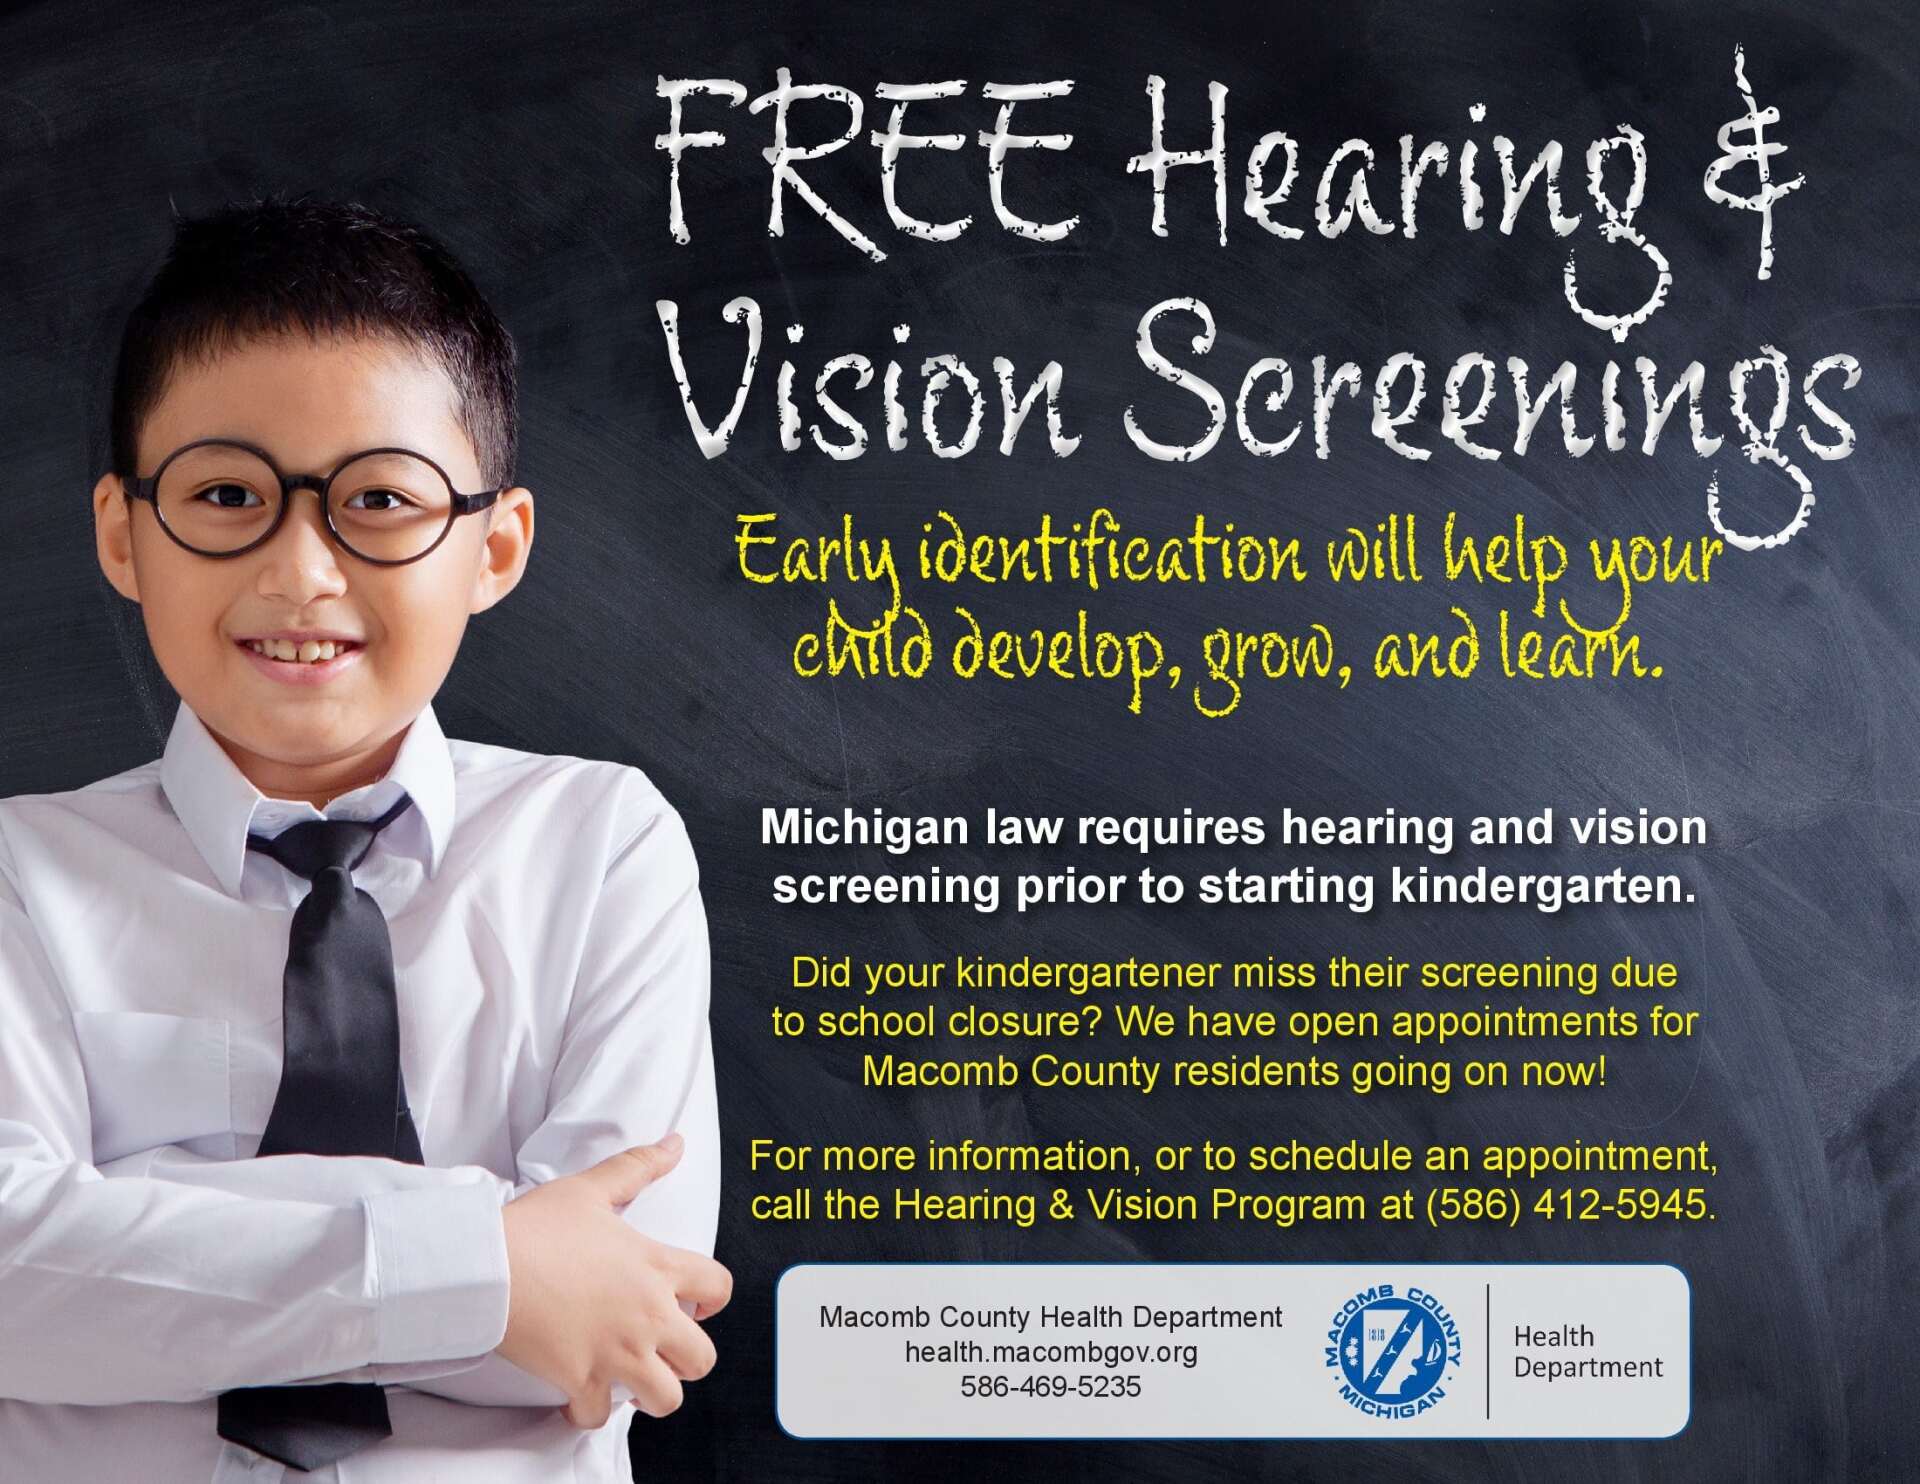 An advertisement for free hearing and vision screenings